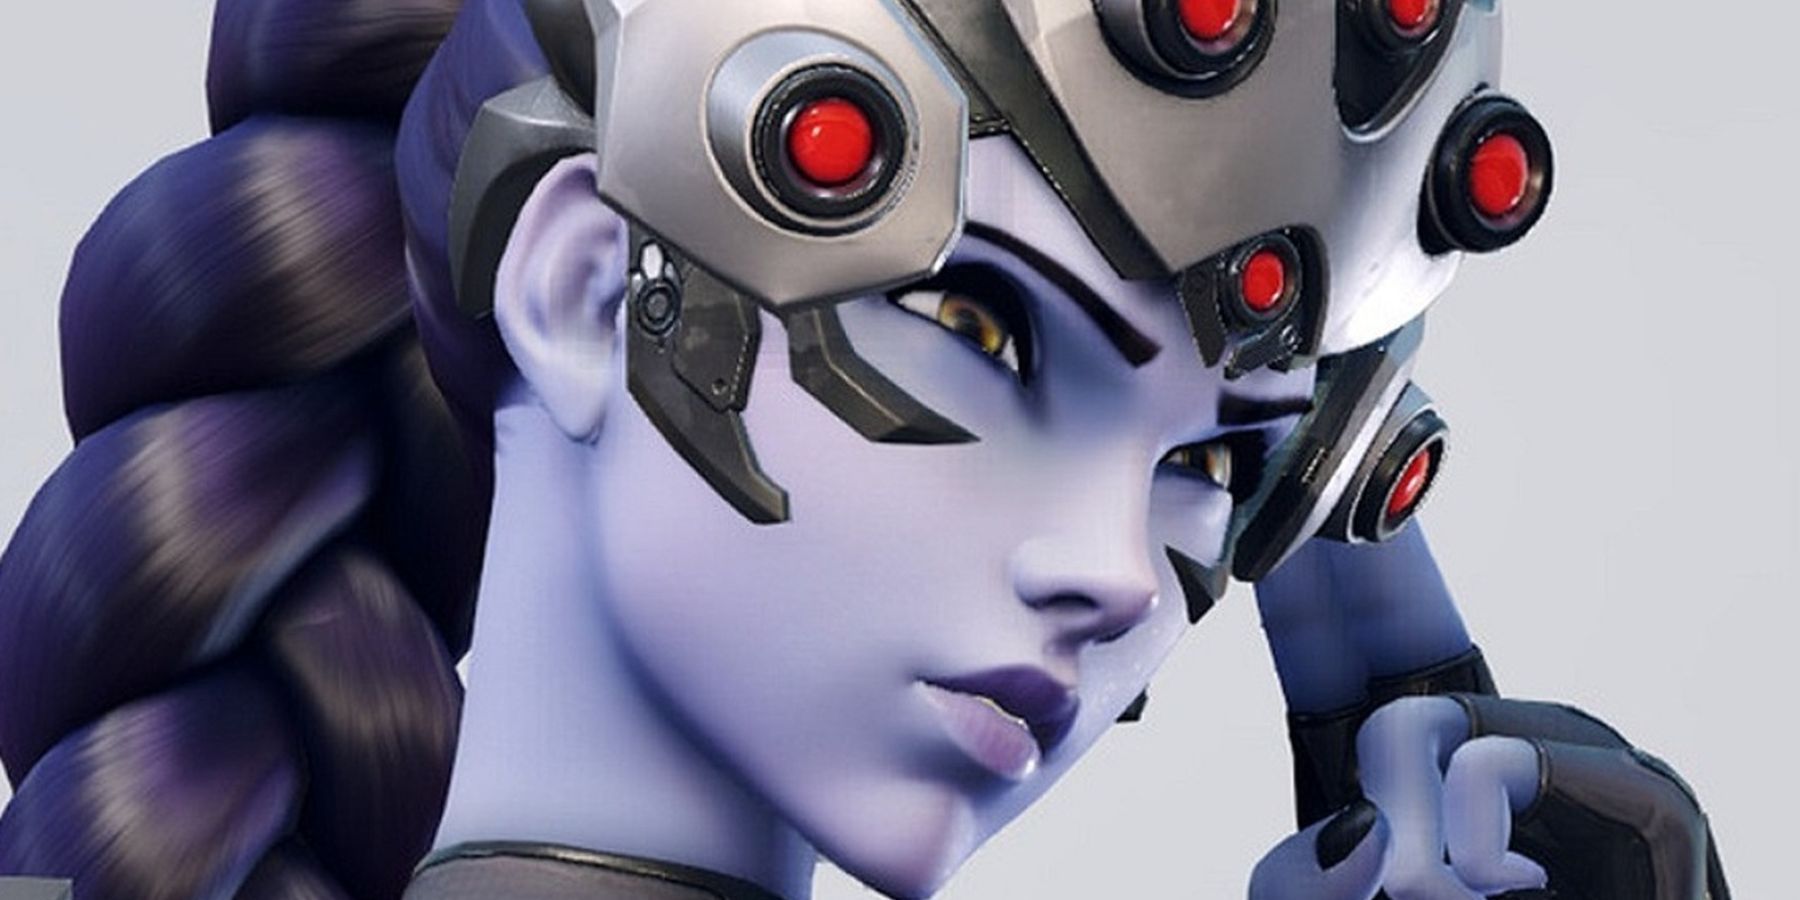 Overwatch 2: Widowmaker's Brainwashing Could Be A Key Part of The PvE Story